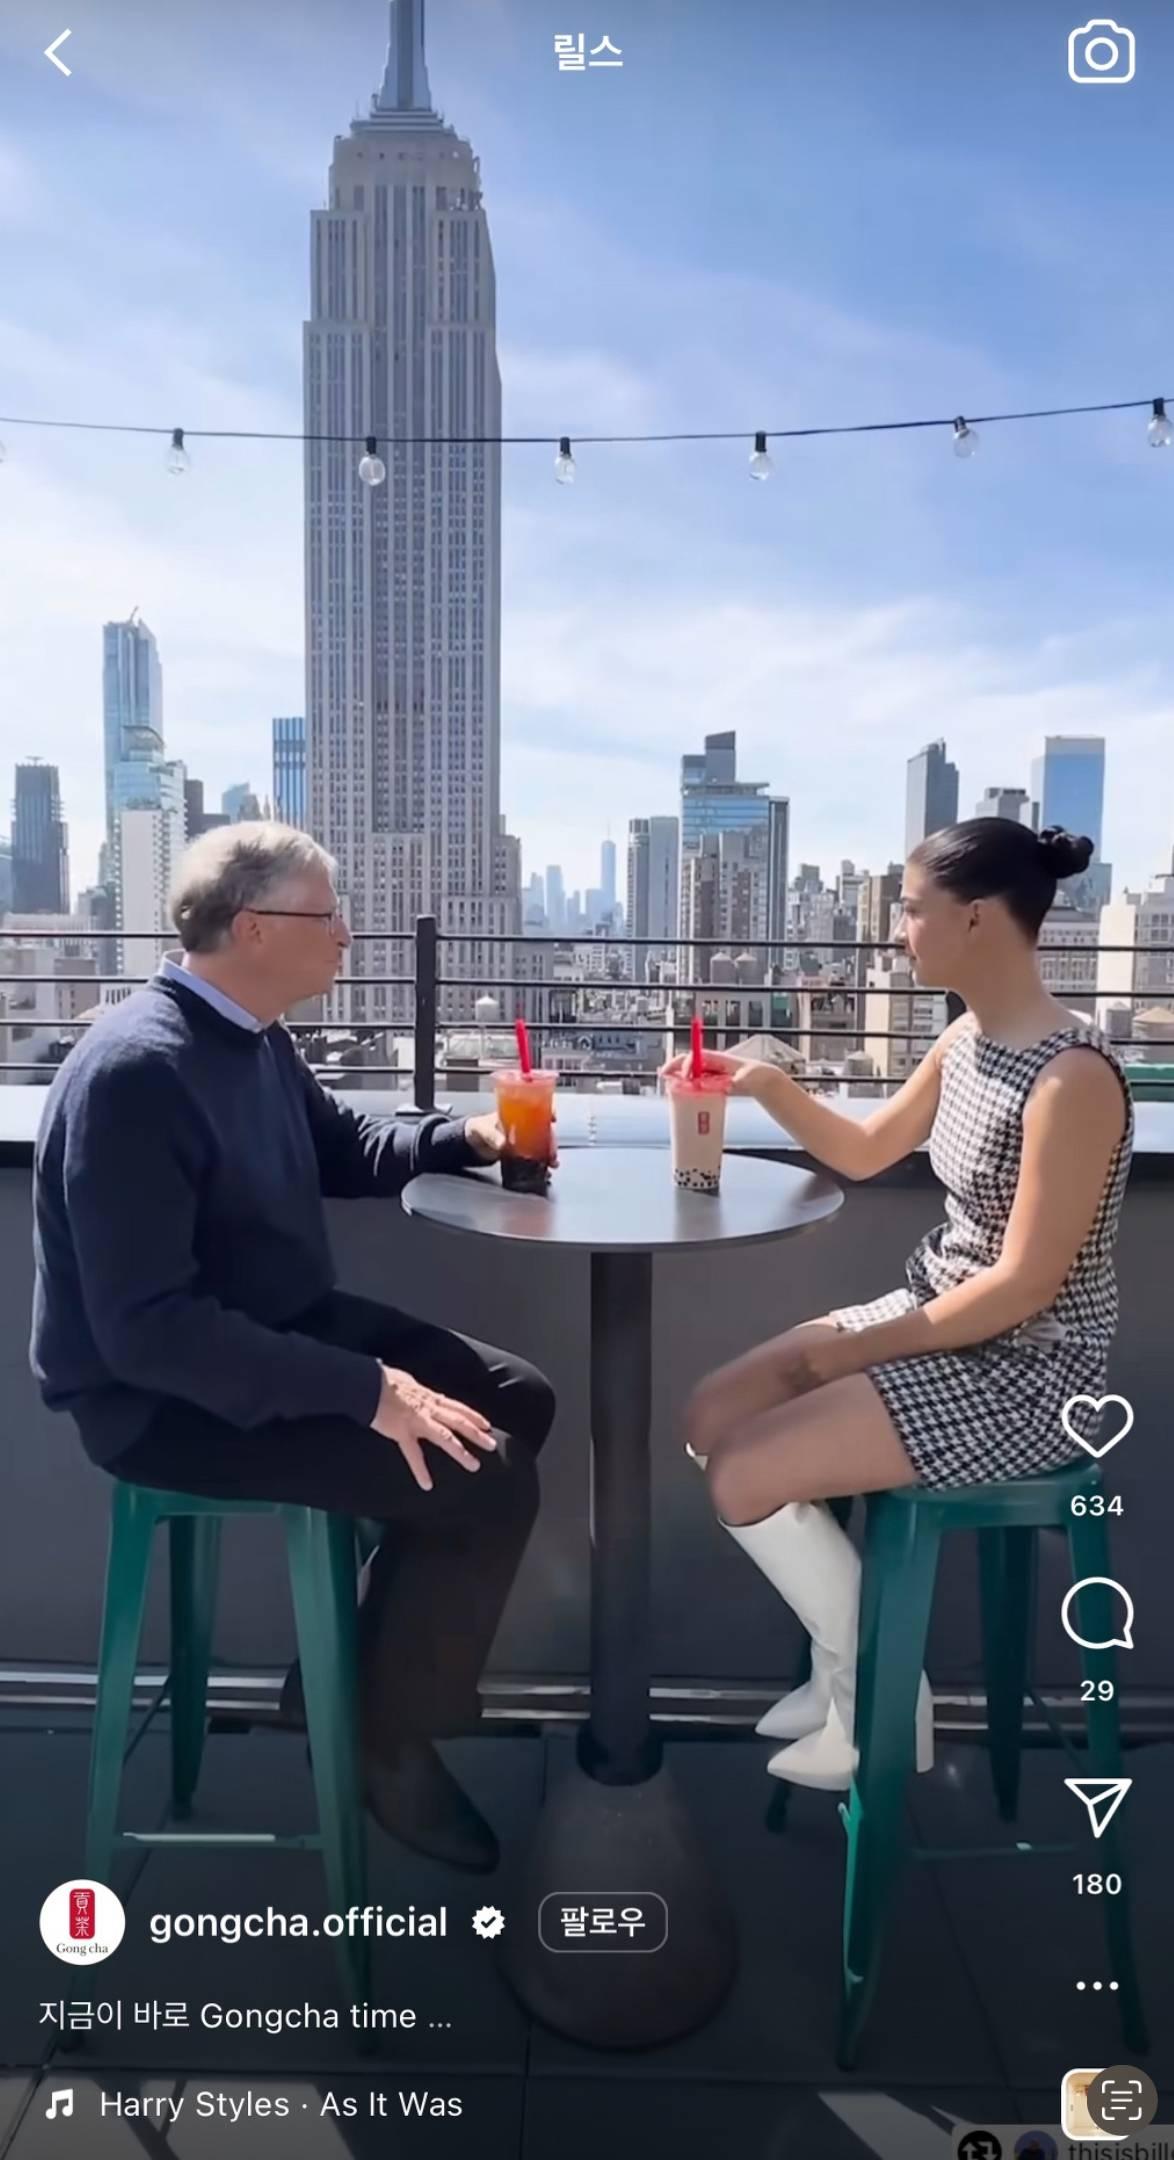 (SOUND)Bill Gates and his daughter posted on Gongcha's official Instagram